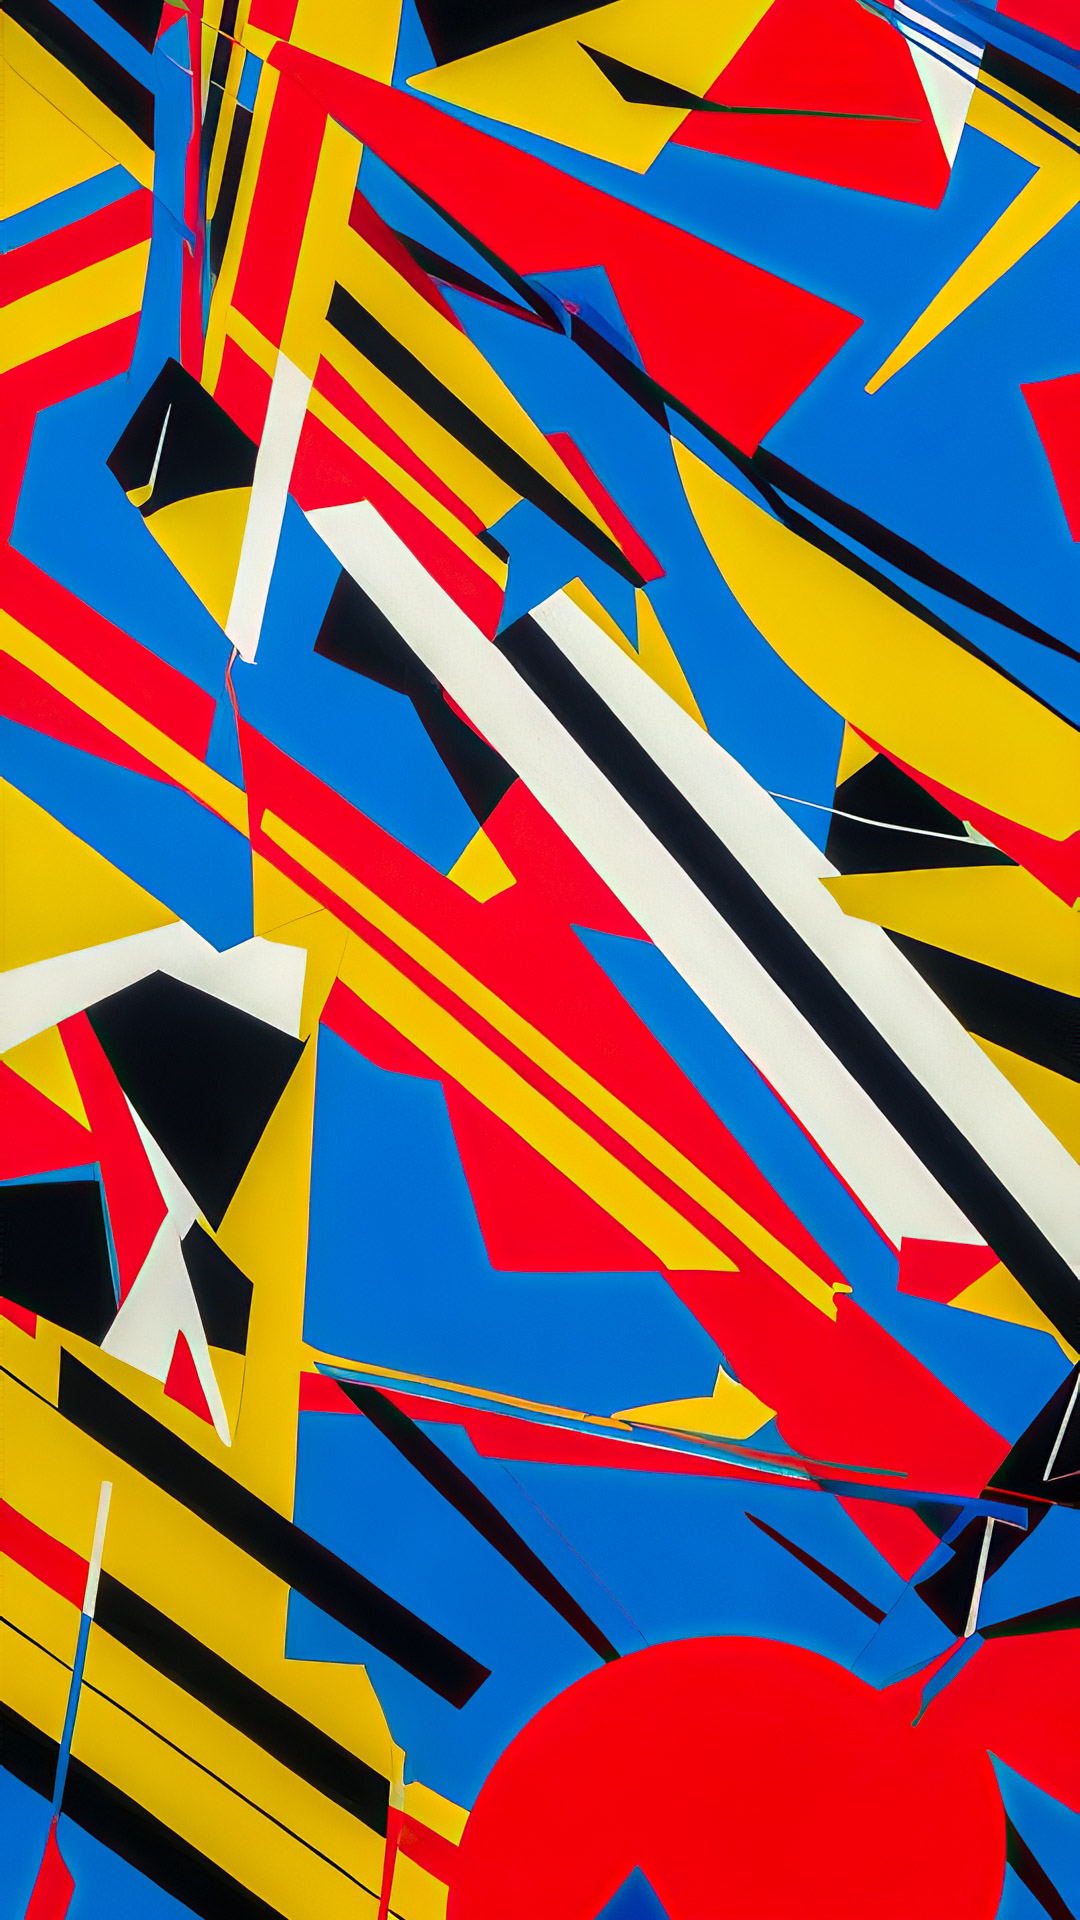 Dive into a realm of chaos and creativity with intersecting lines and bold splashes of primary colors in our HD abstract wallpaper.